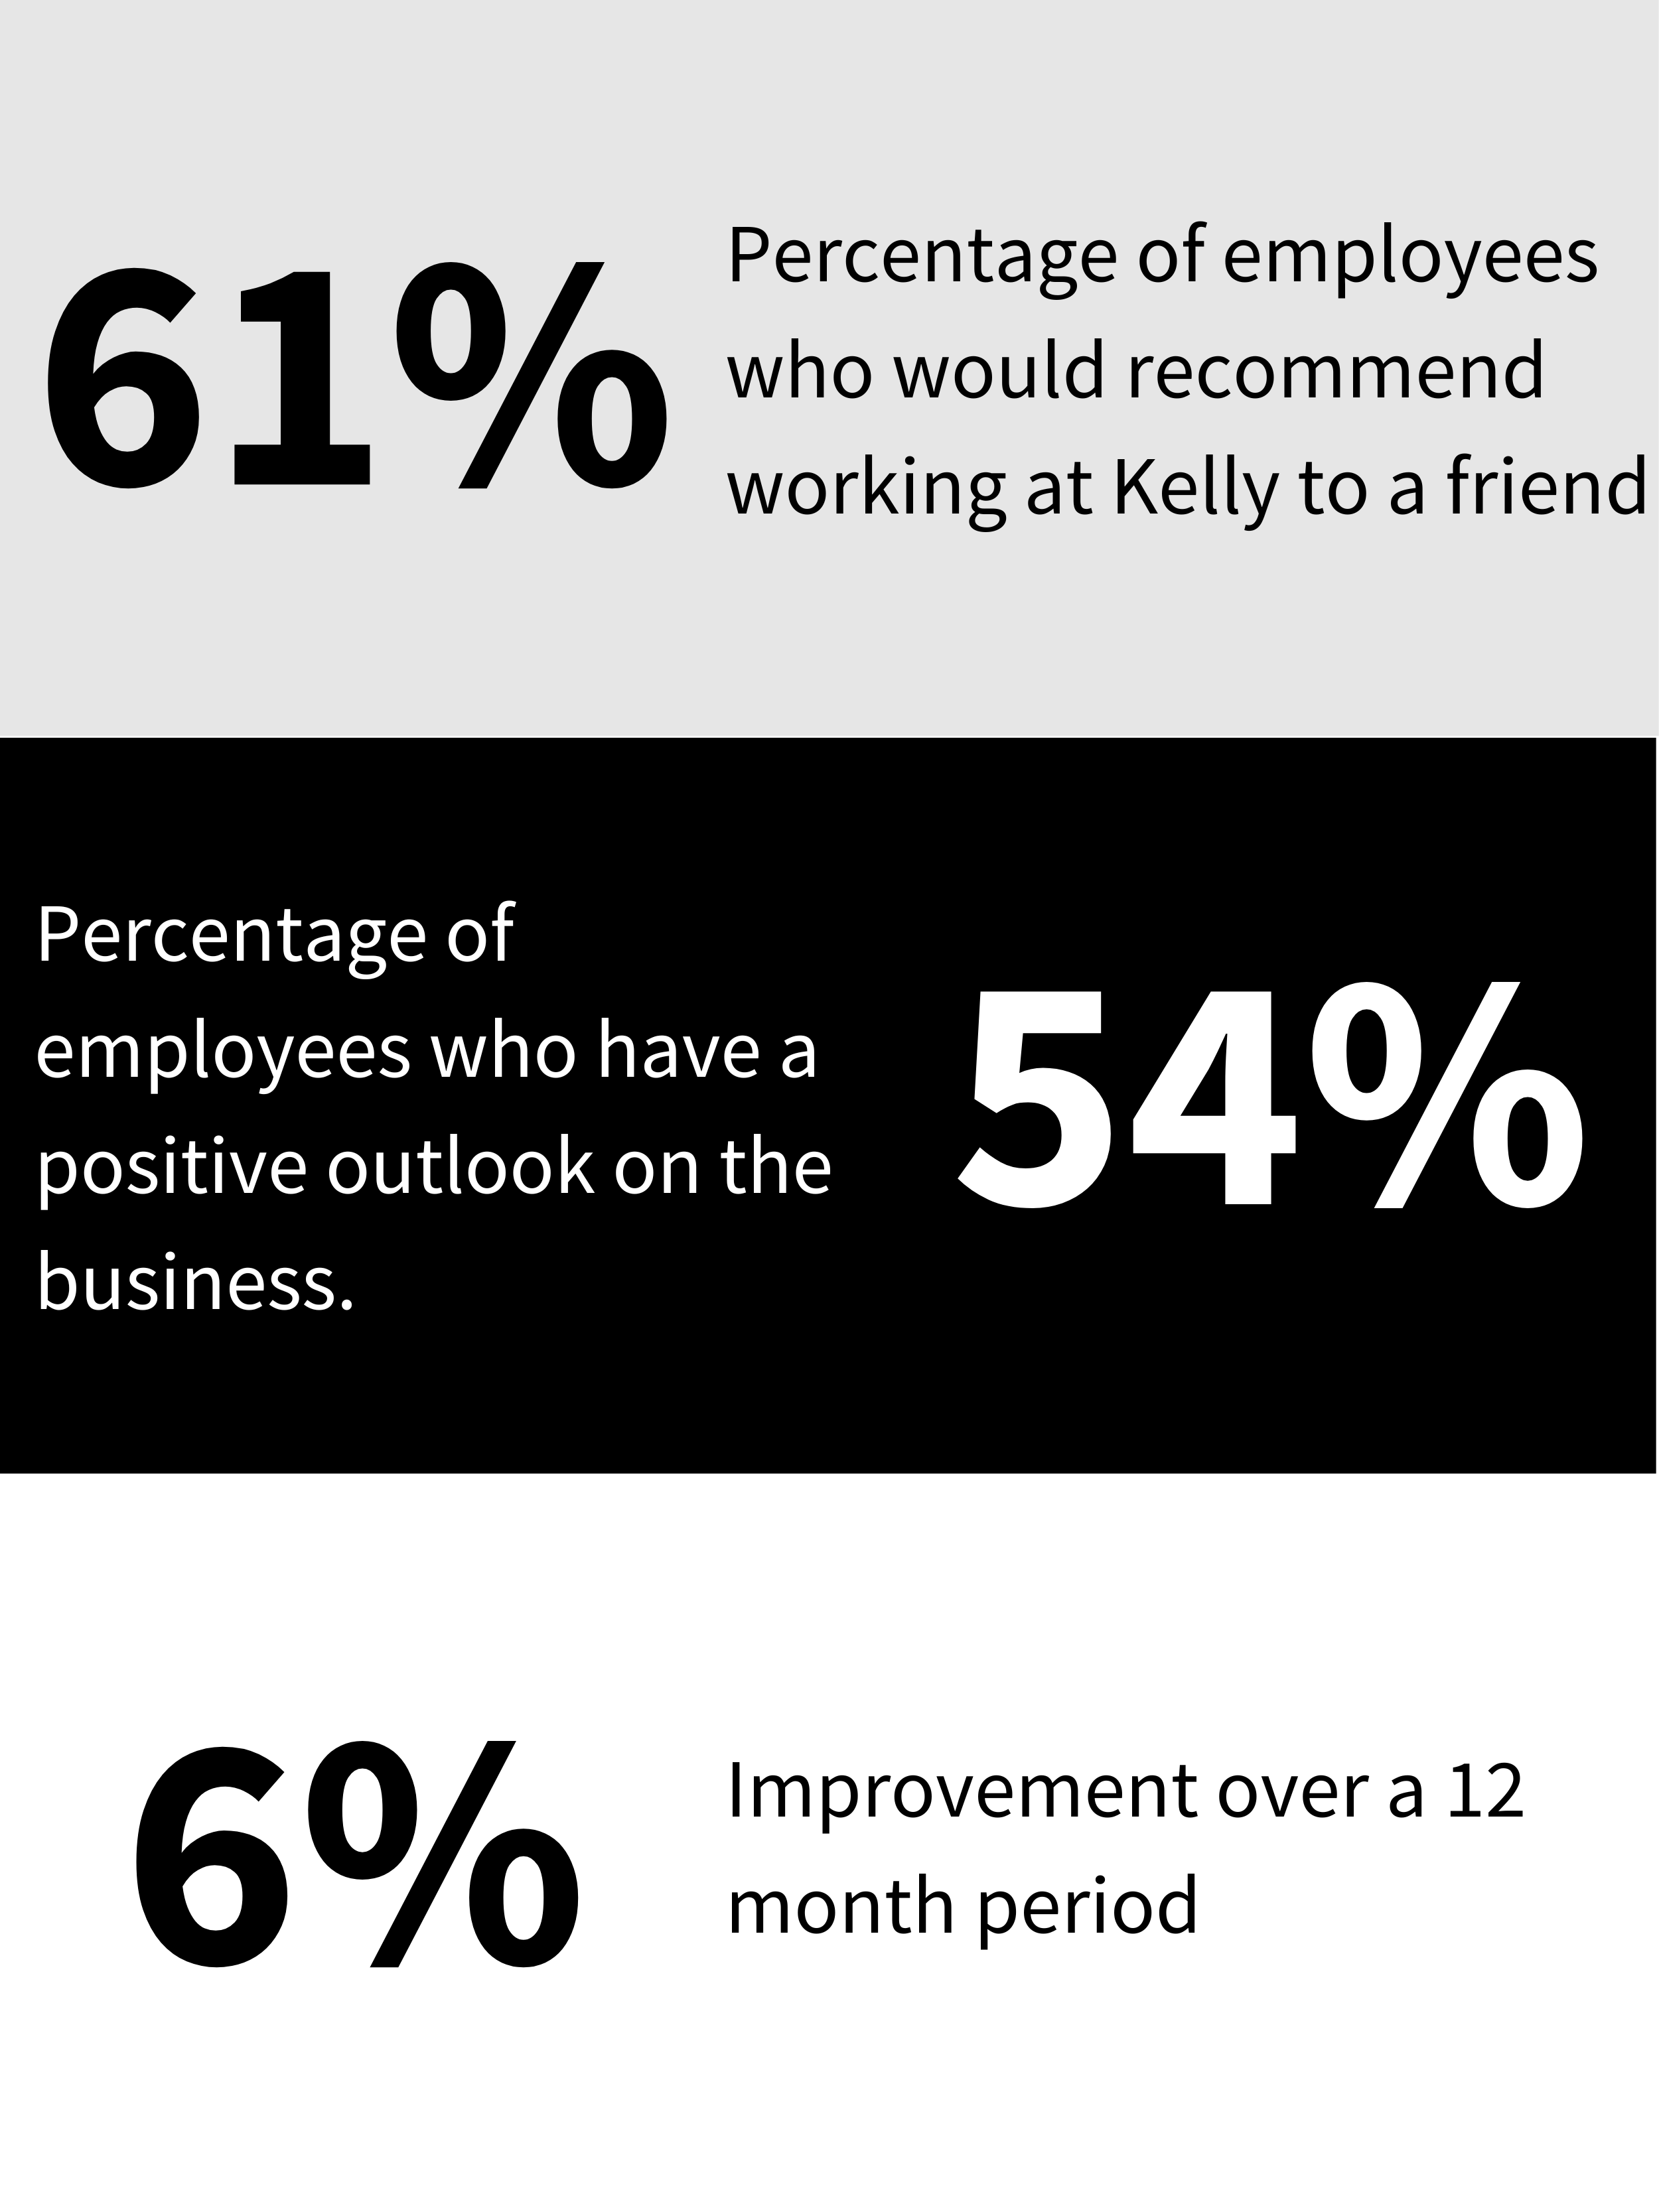 An infographic that shows that 61% of employees would recommend working at Kelly Services to a friend. 
 54% held a positive outlook for the business. And a 6% improvement over the last 12 months.